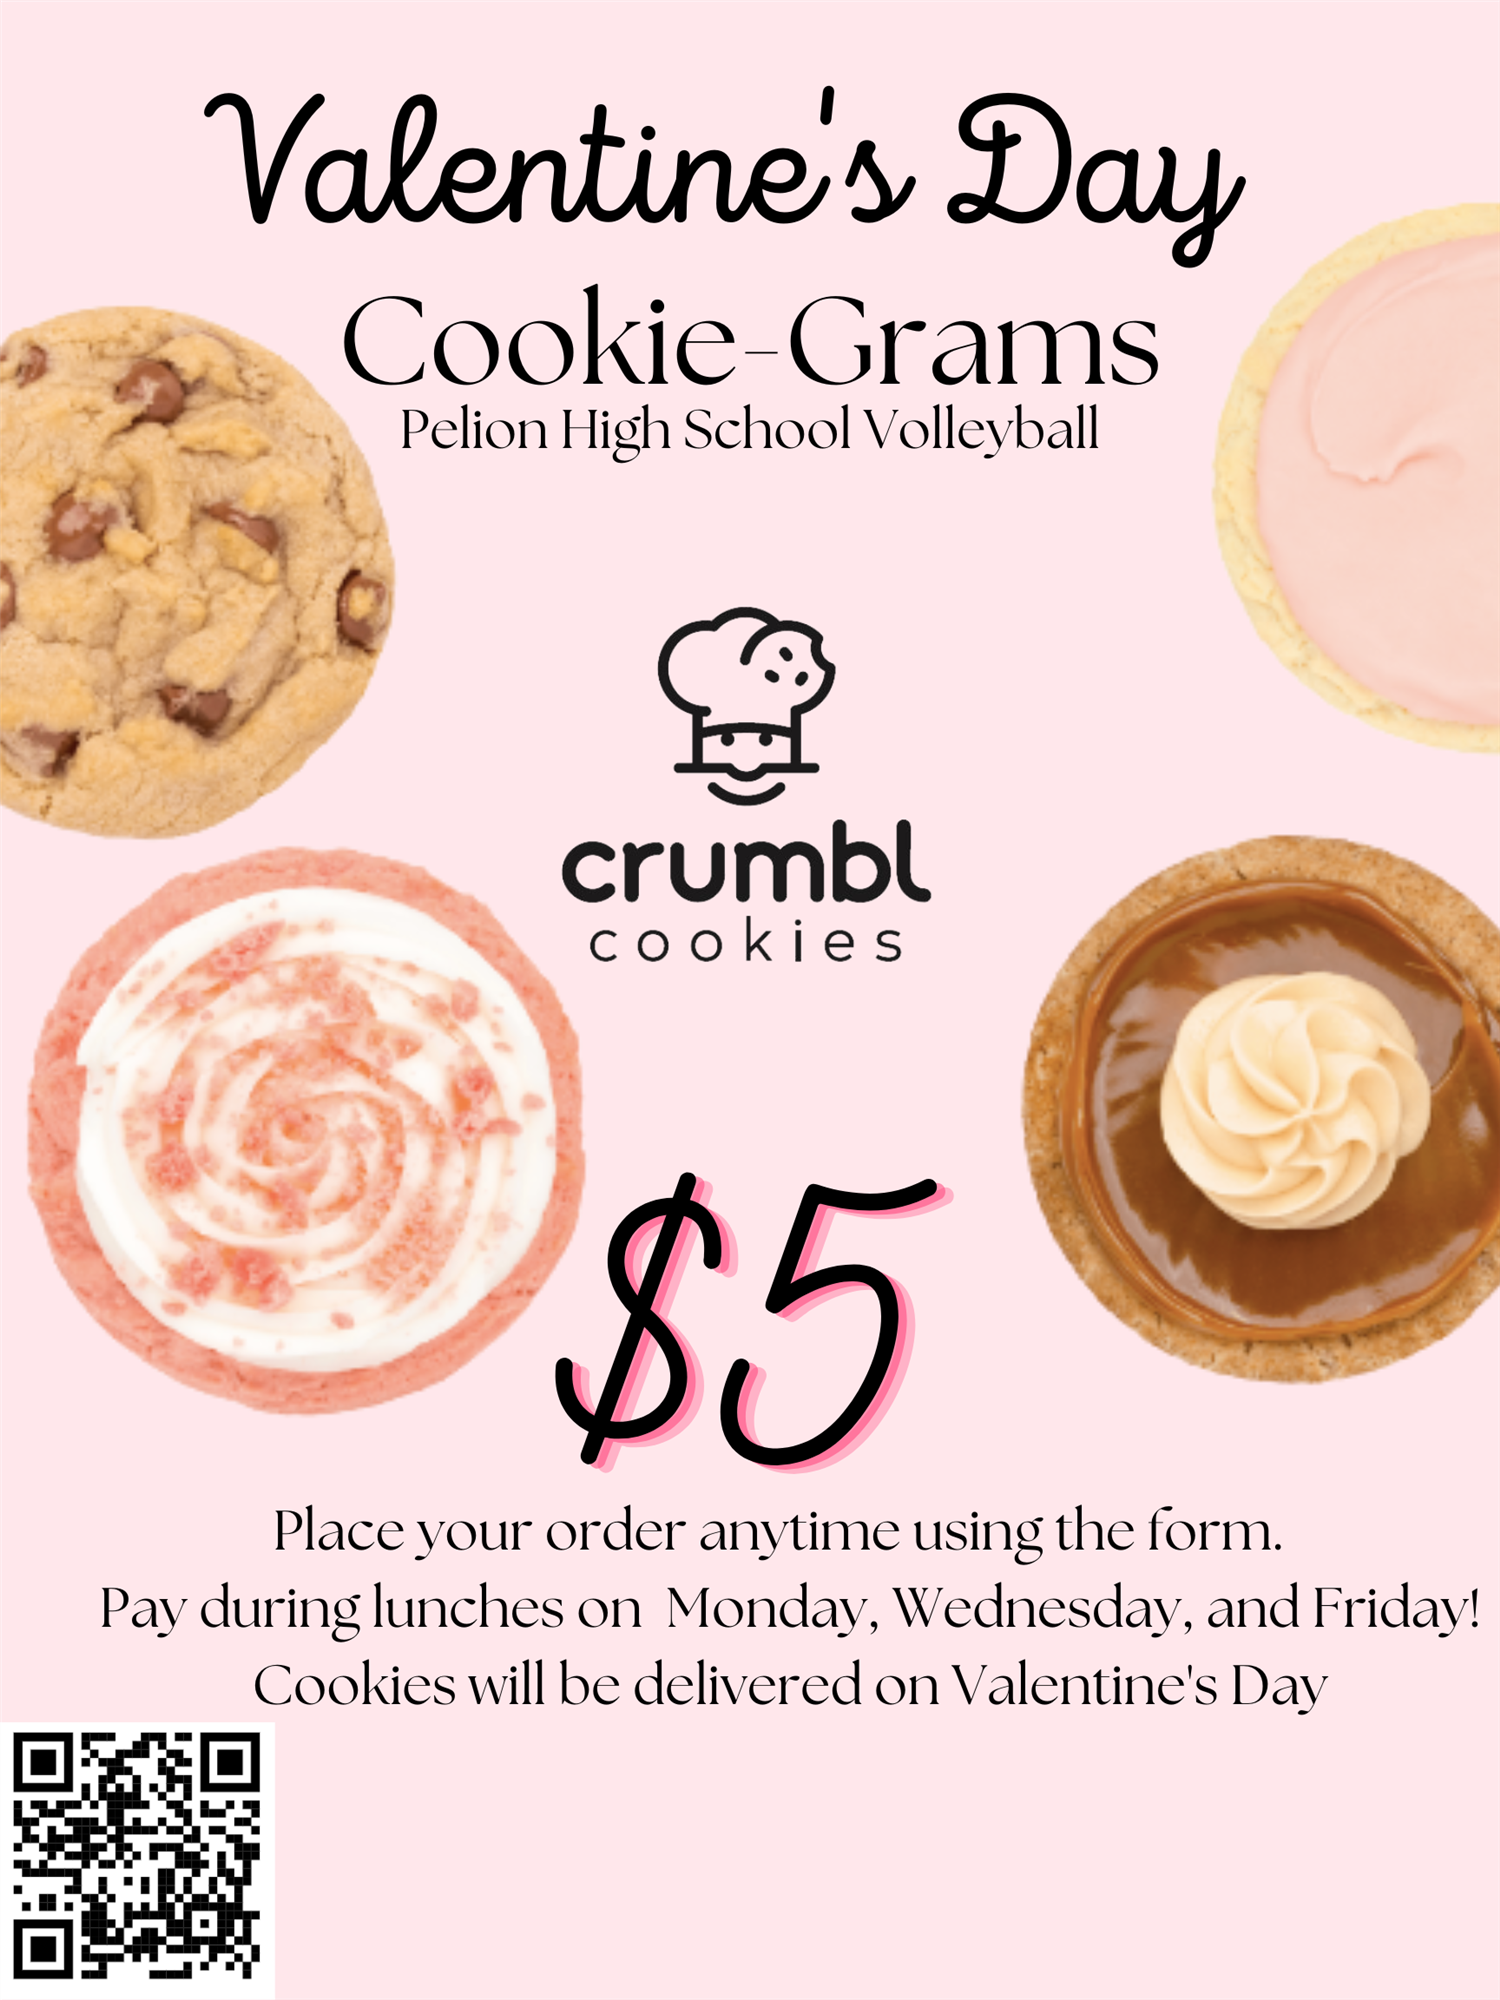  Cookie picture and Crumbl logo